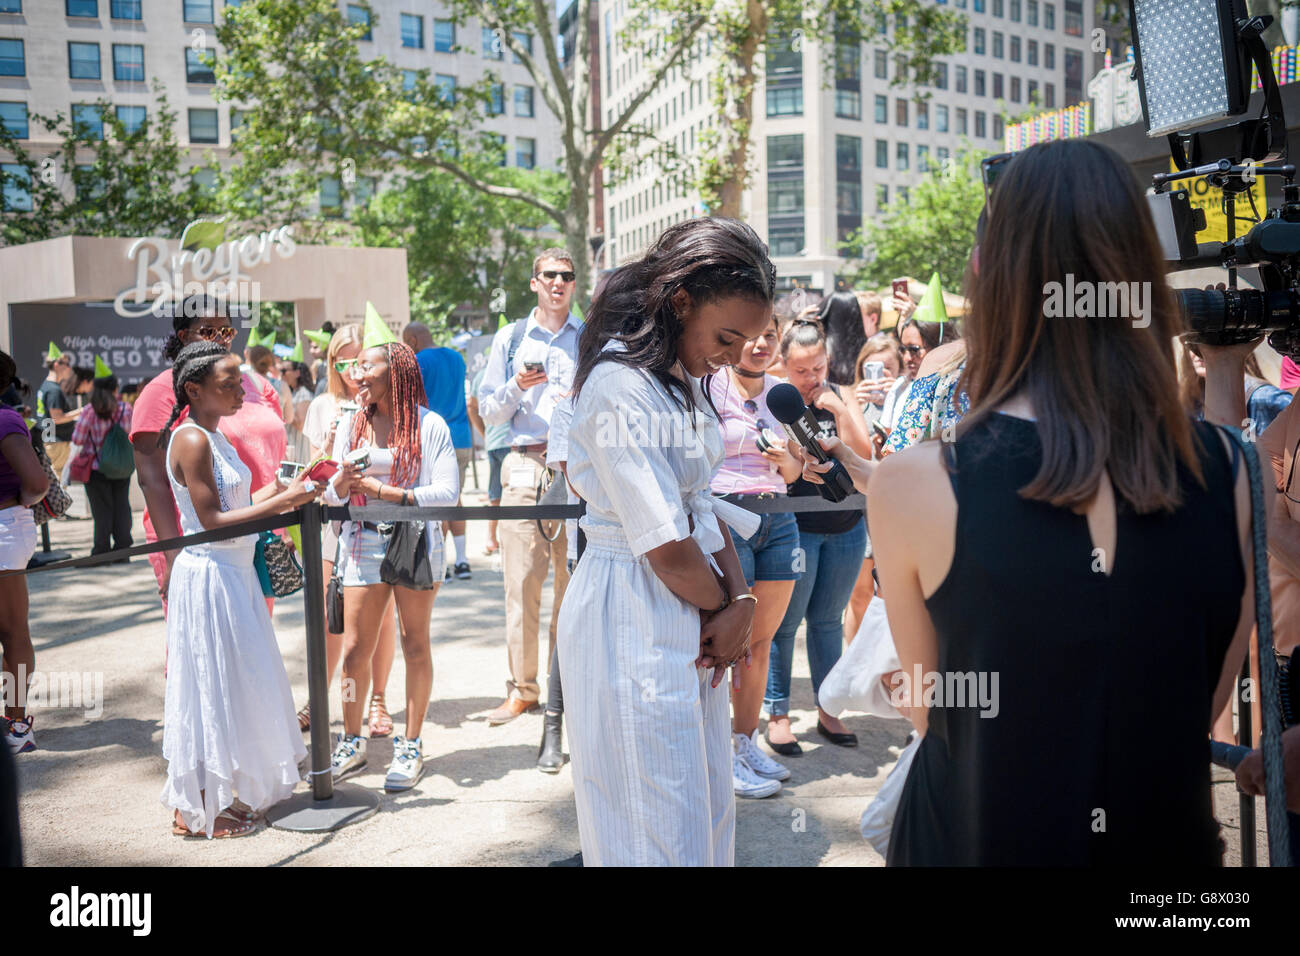 Actress/singer Kelly Rowland is interviewed in Madison Square Park in New York during the Breyers ice cream event on Wednesday, June 22, 2016. Breyers is giving away the summer treat as a celebration of the company's 150th anniversary. Besides the dessert visitors had the opportunity to meet various celebrities that Breyers had brought in. Breyers is a brand of the giant conglomerate Unilever. (© Richard B. Levine) Stock Photo